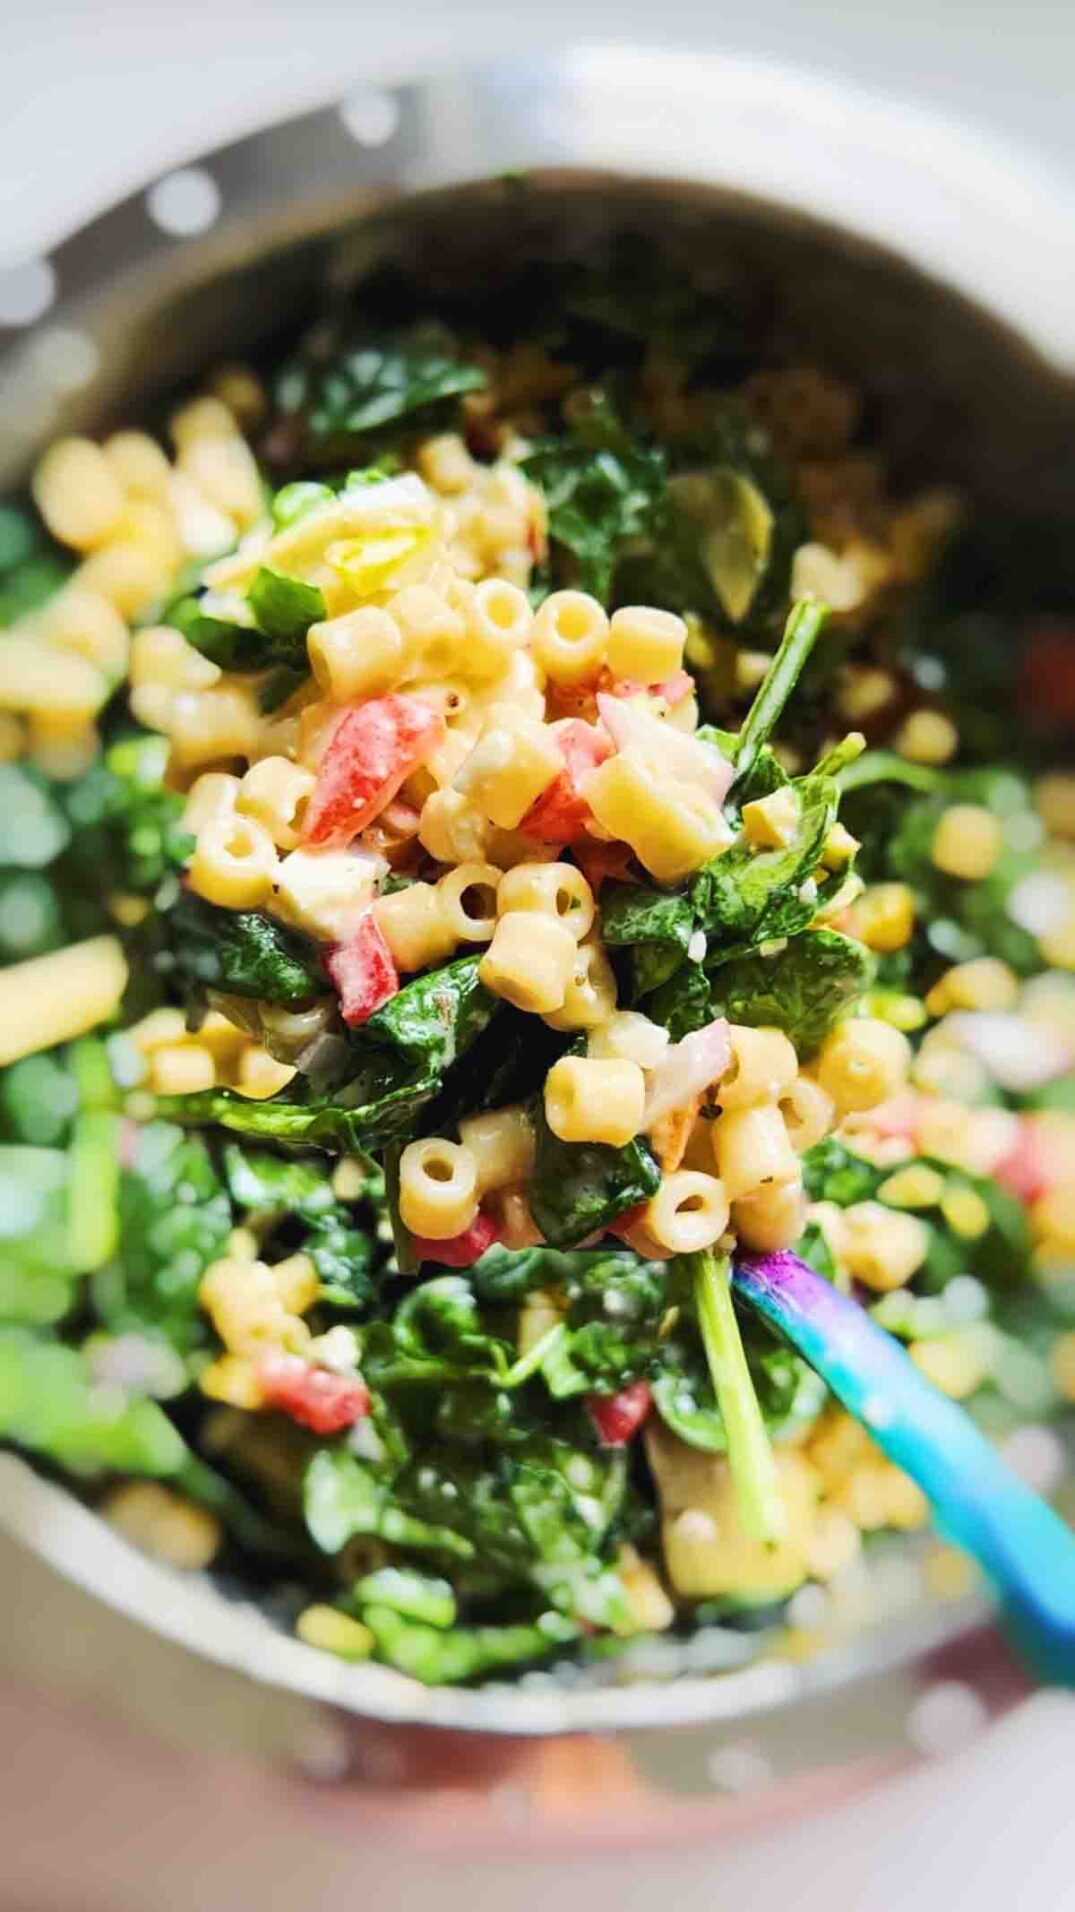 a spoon holding ditalini pasta salad over a blurred out bowl.